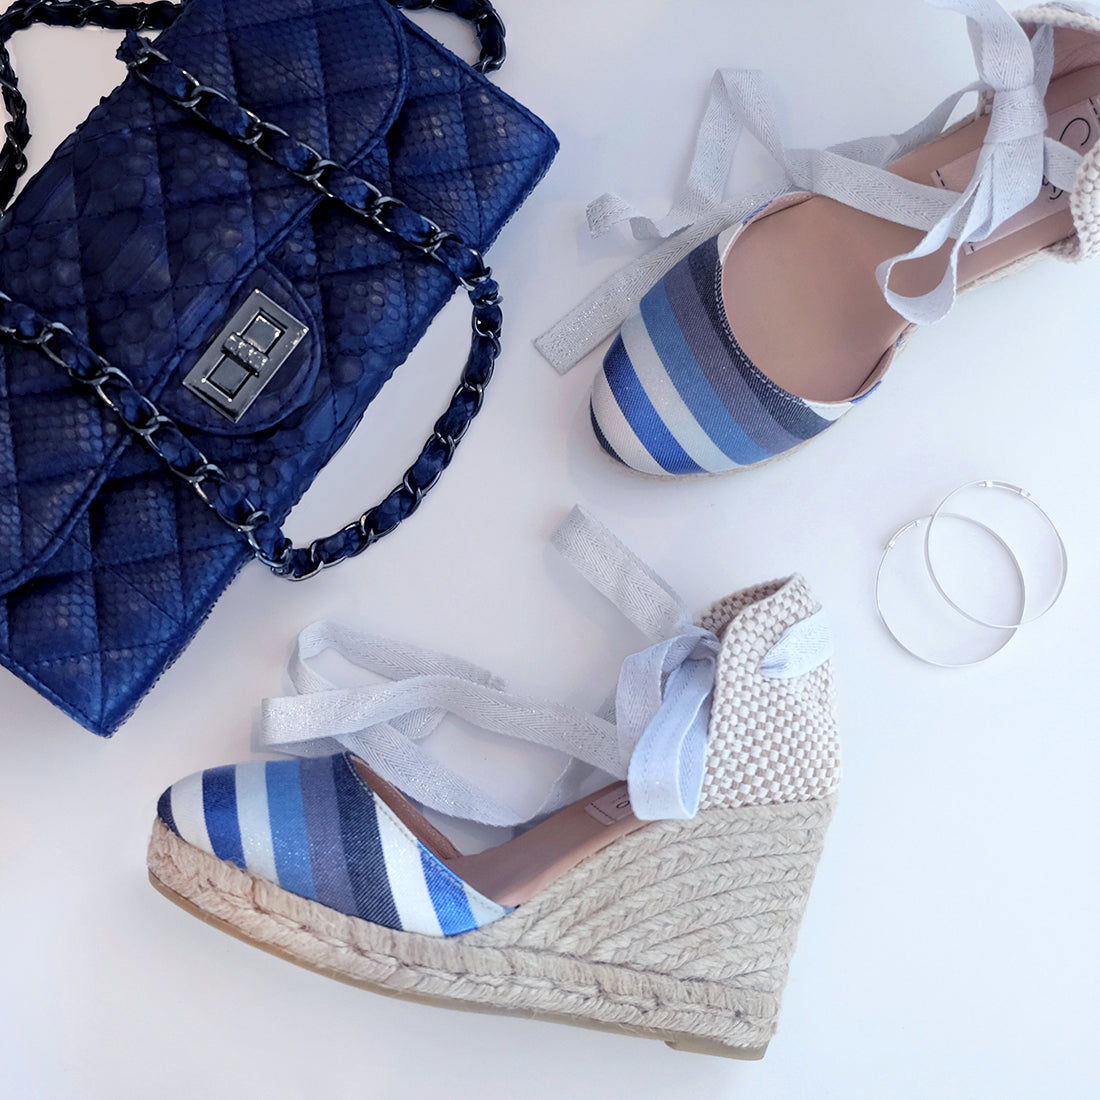 cute espadrilles wedges in different blue shade stripes by badt and co and Chanel type handbag in navy blue by Suzette accessories